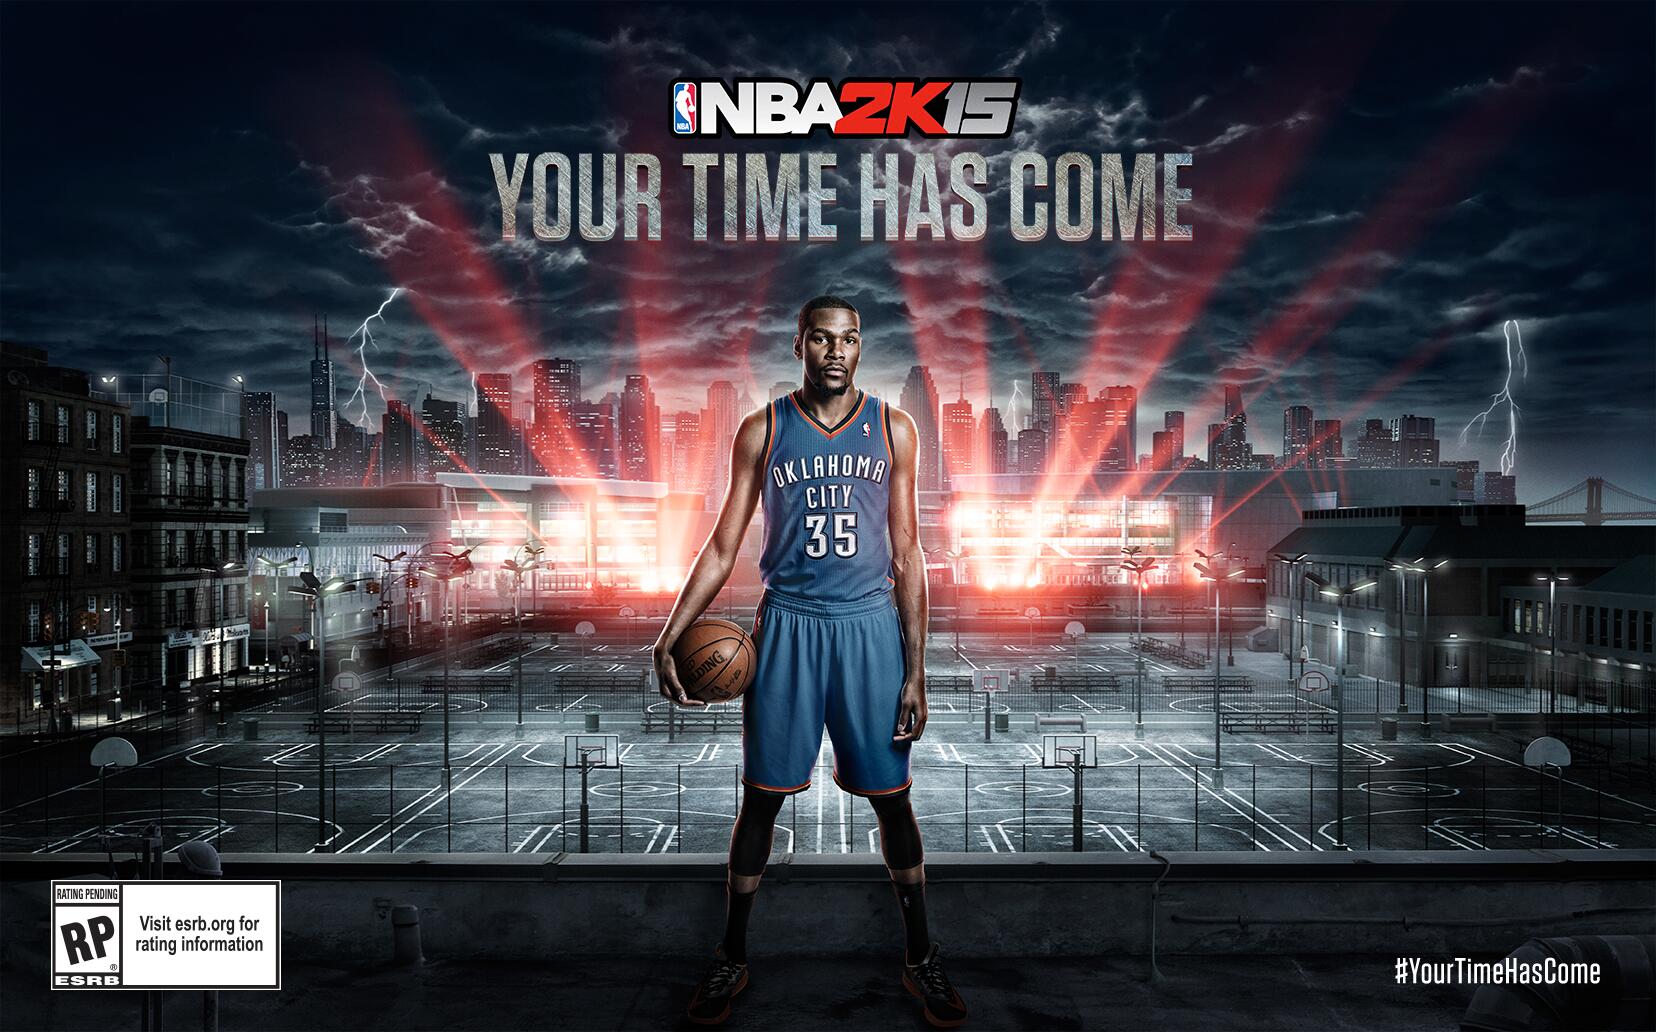 Kevin Durant named NBA 2k15 cover athlete - CBSSports.com